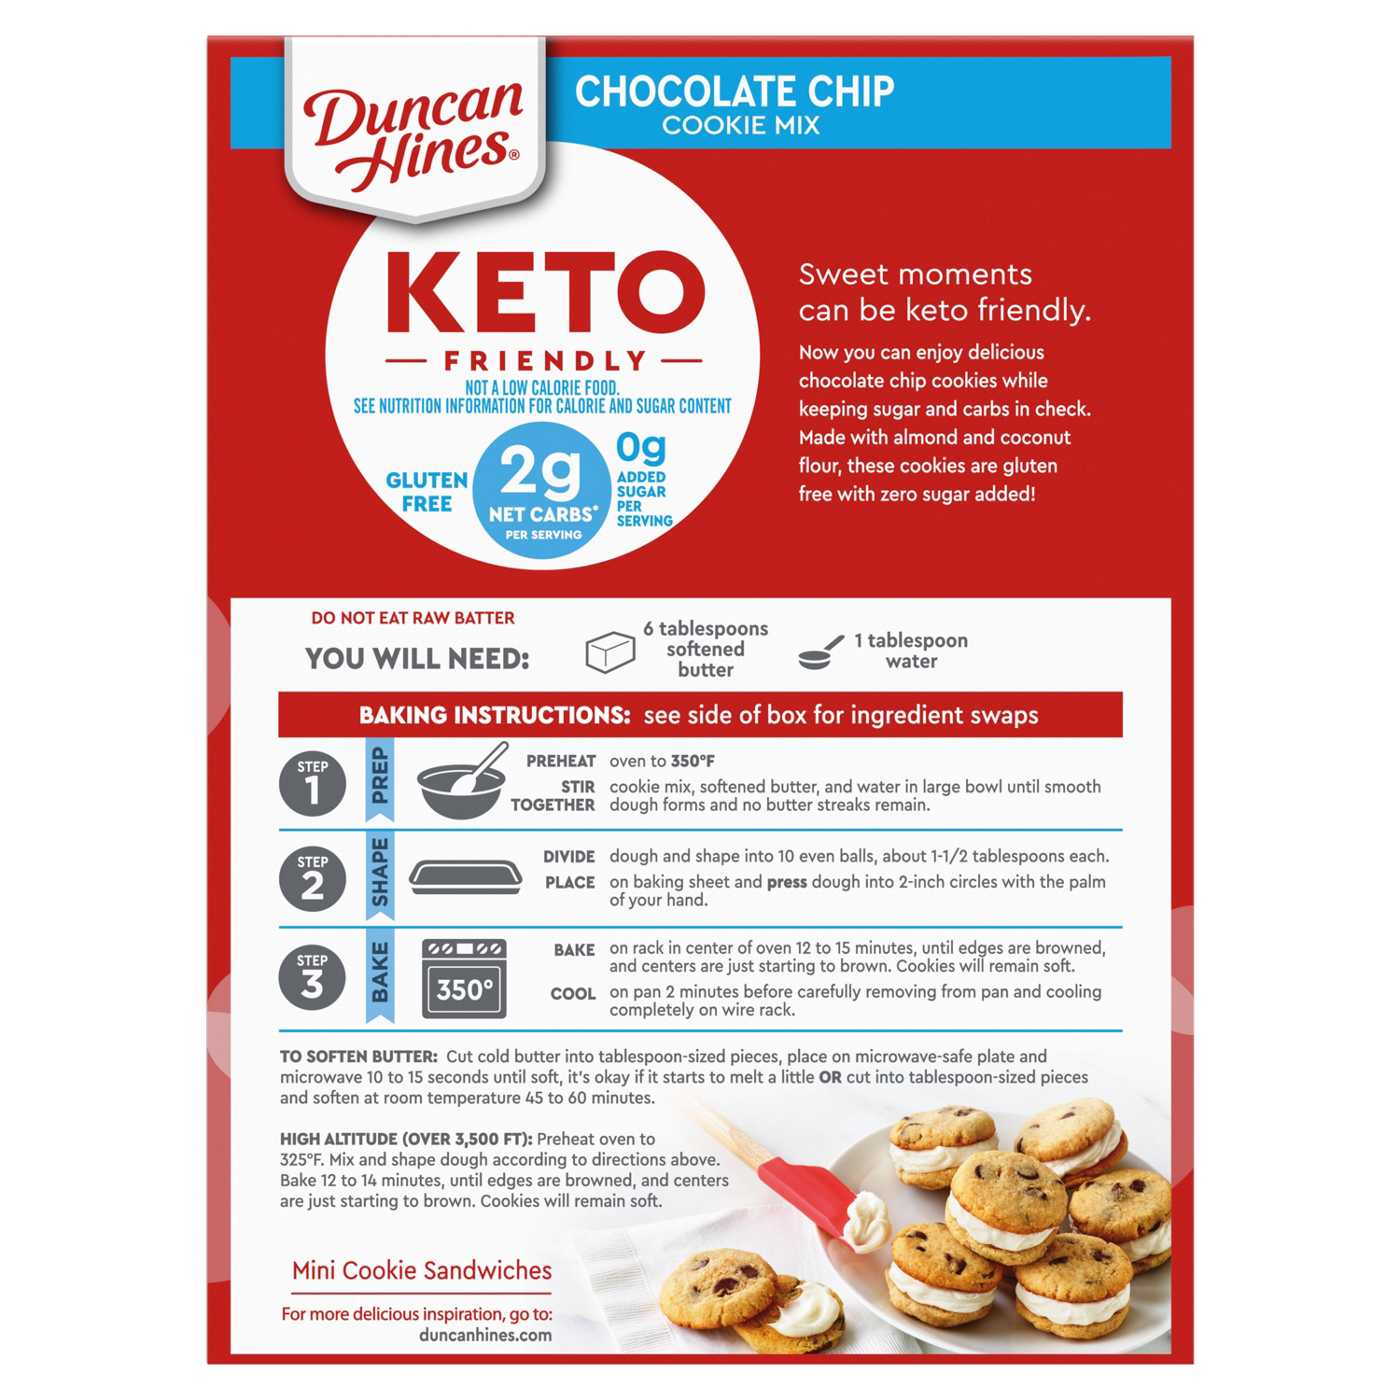 Duncan Hines Keto Friendly Chocolate Chip Cookie Mix; image 7 of 7